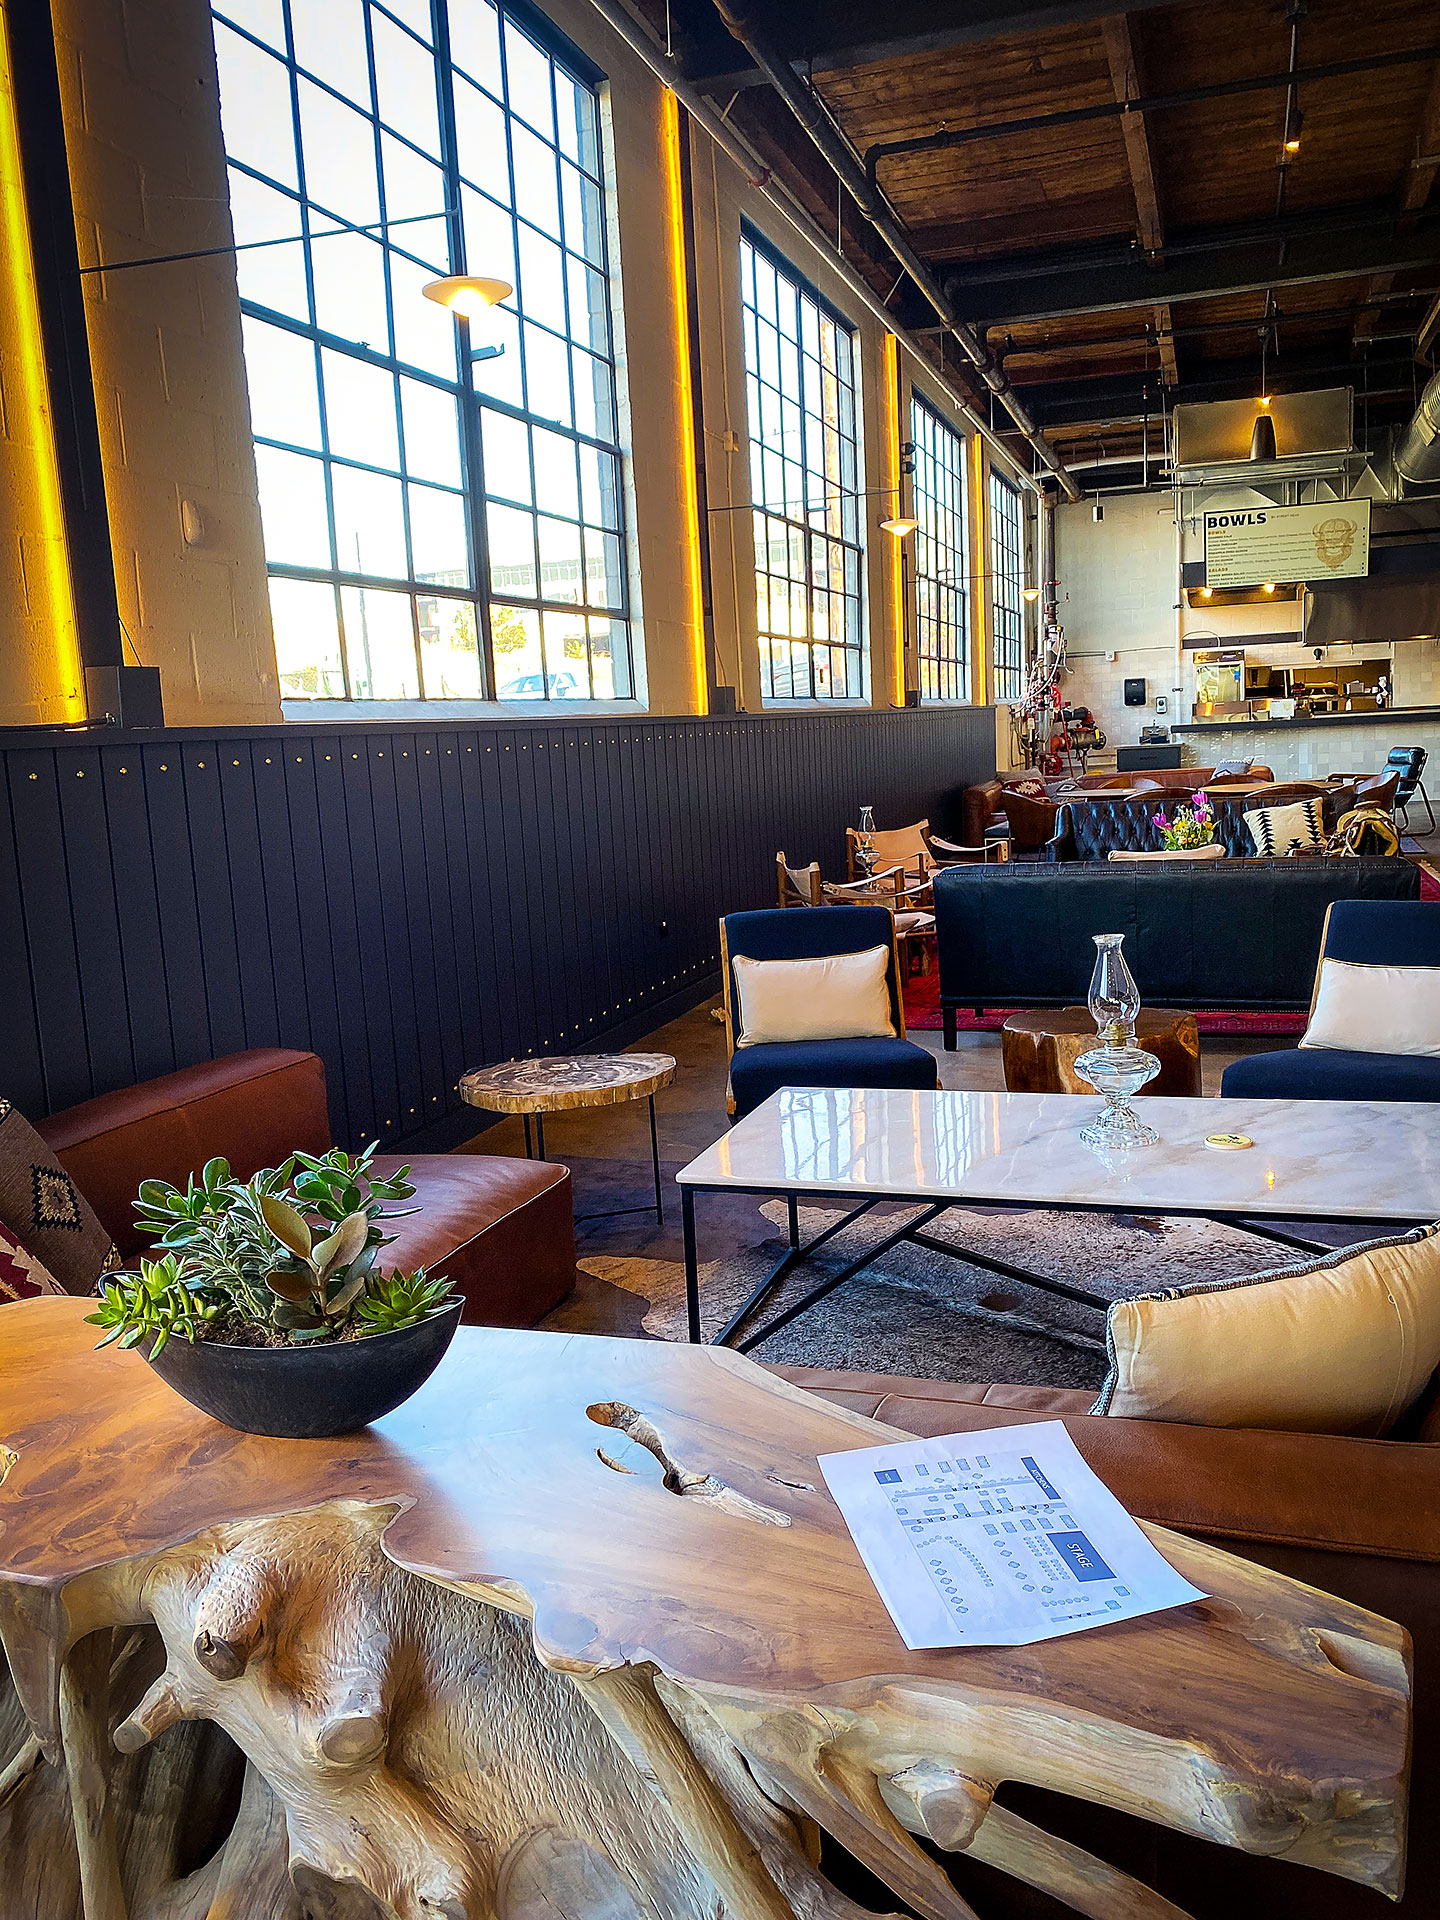 Number 38 Social Hall - Bar, Restaurant & Music Venue in RiNo, Denver - Focused on Colorado local - Mostly outdoor spaces with the feeling of après skiing all year long